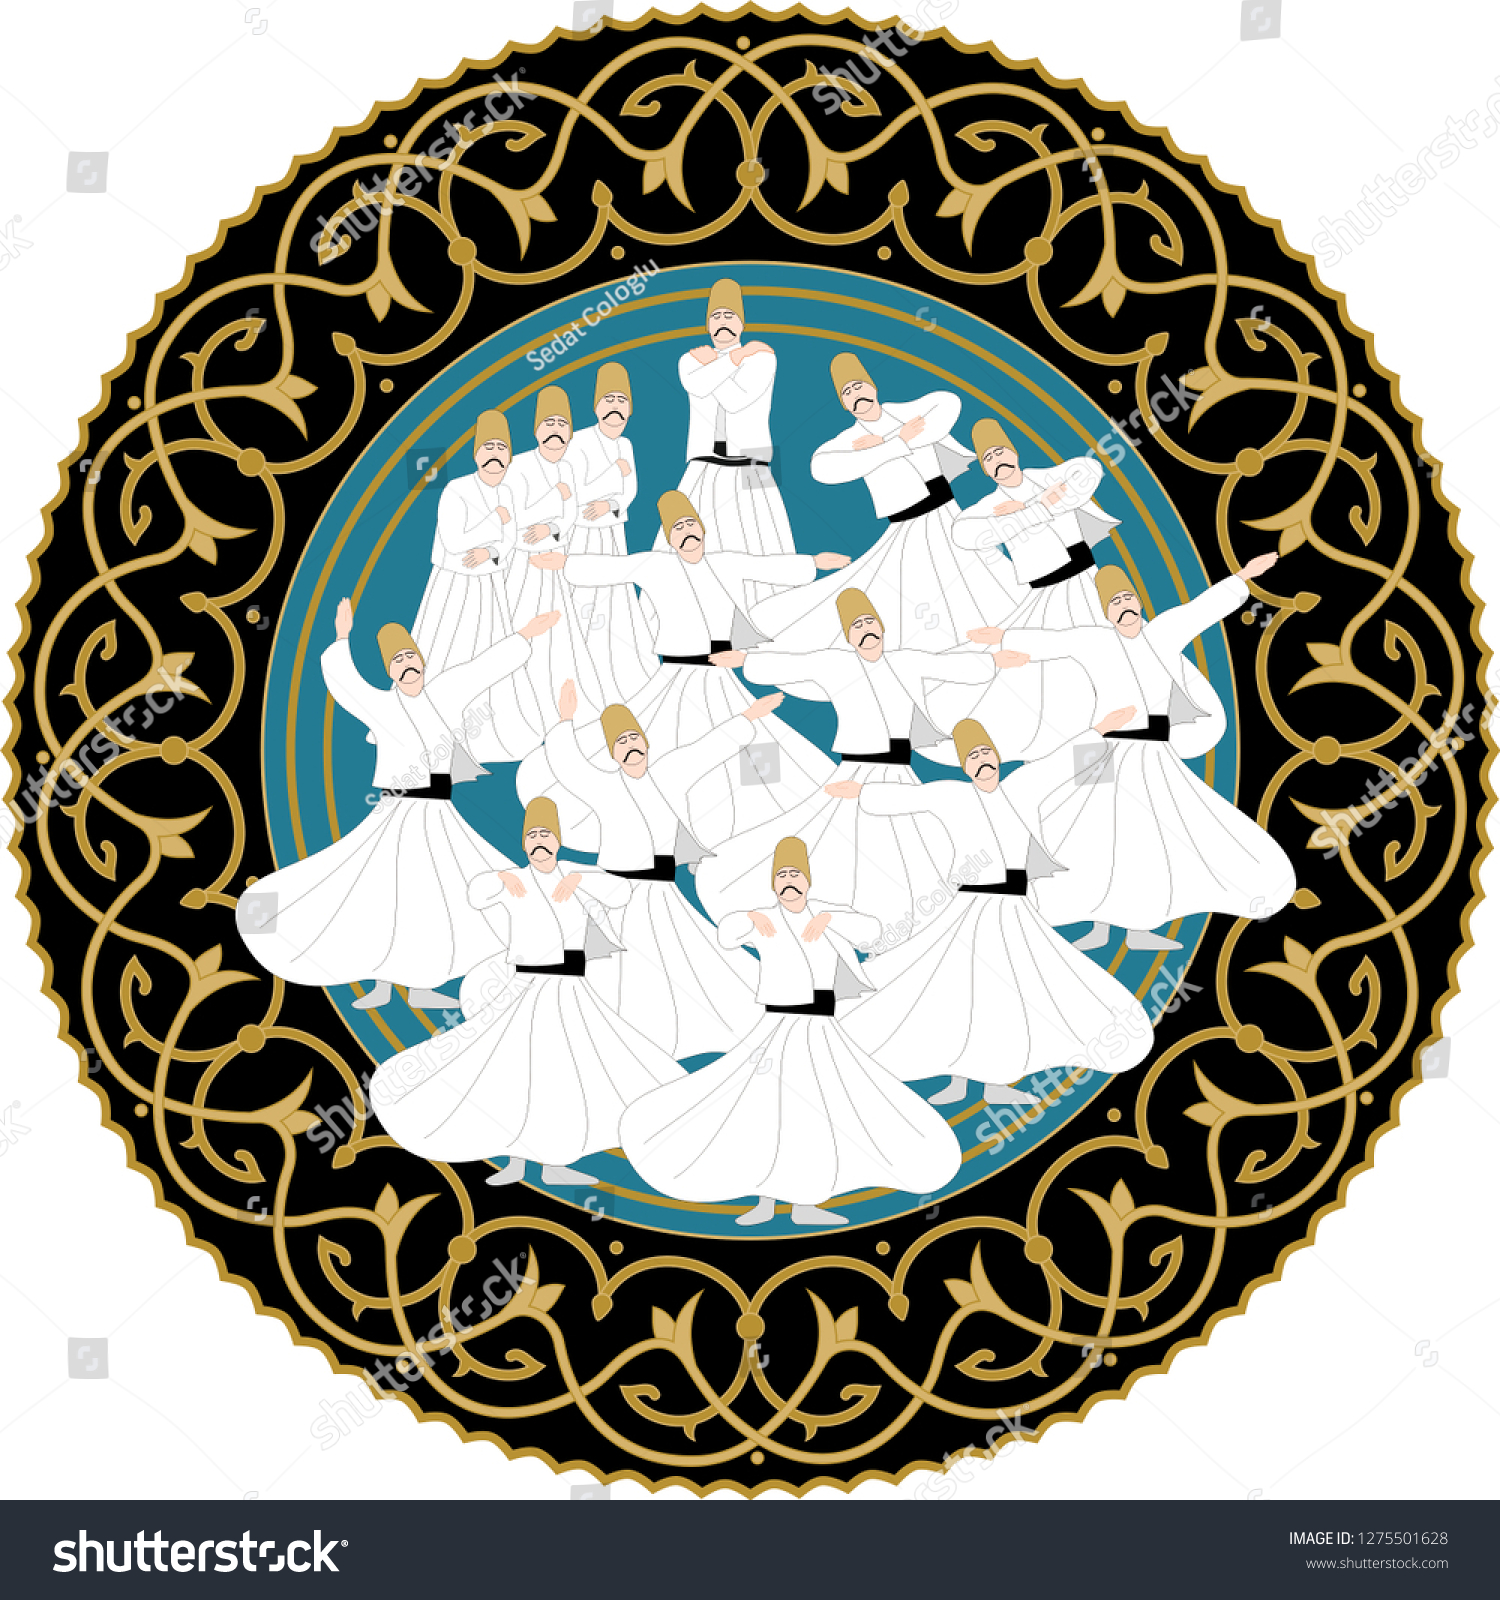 stock-vector-whirling-dervish-sufi-eps-format-vector-drawing-symbolic-study-of-mevlevi-mystical-dance-it-can-1275501628